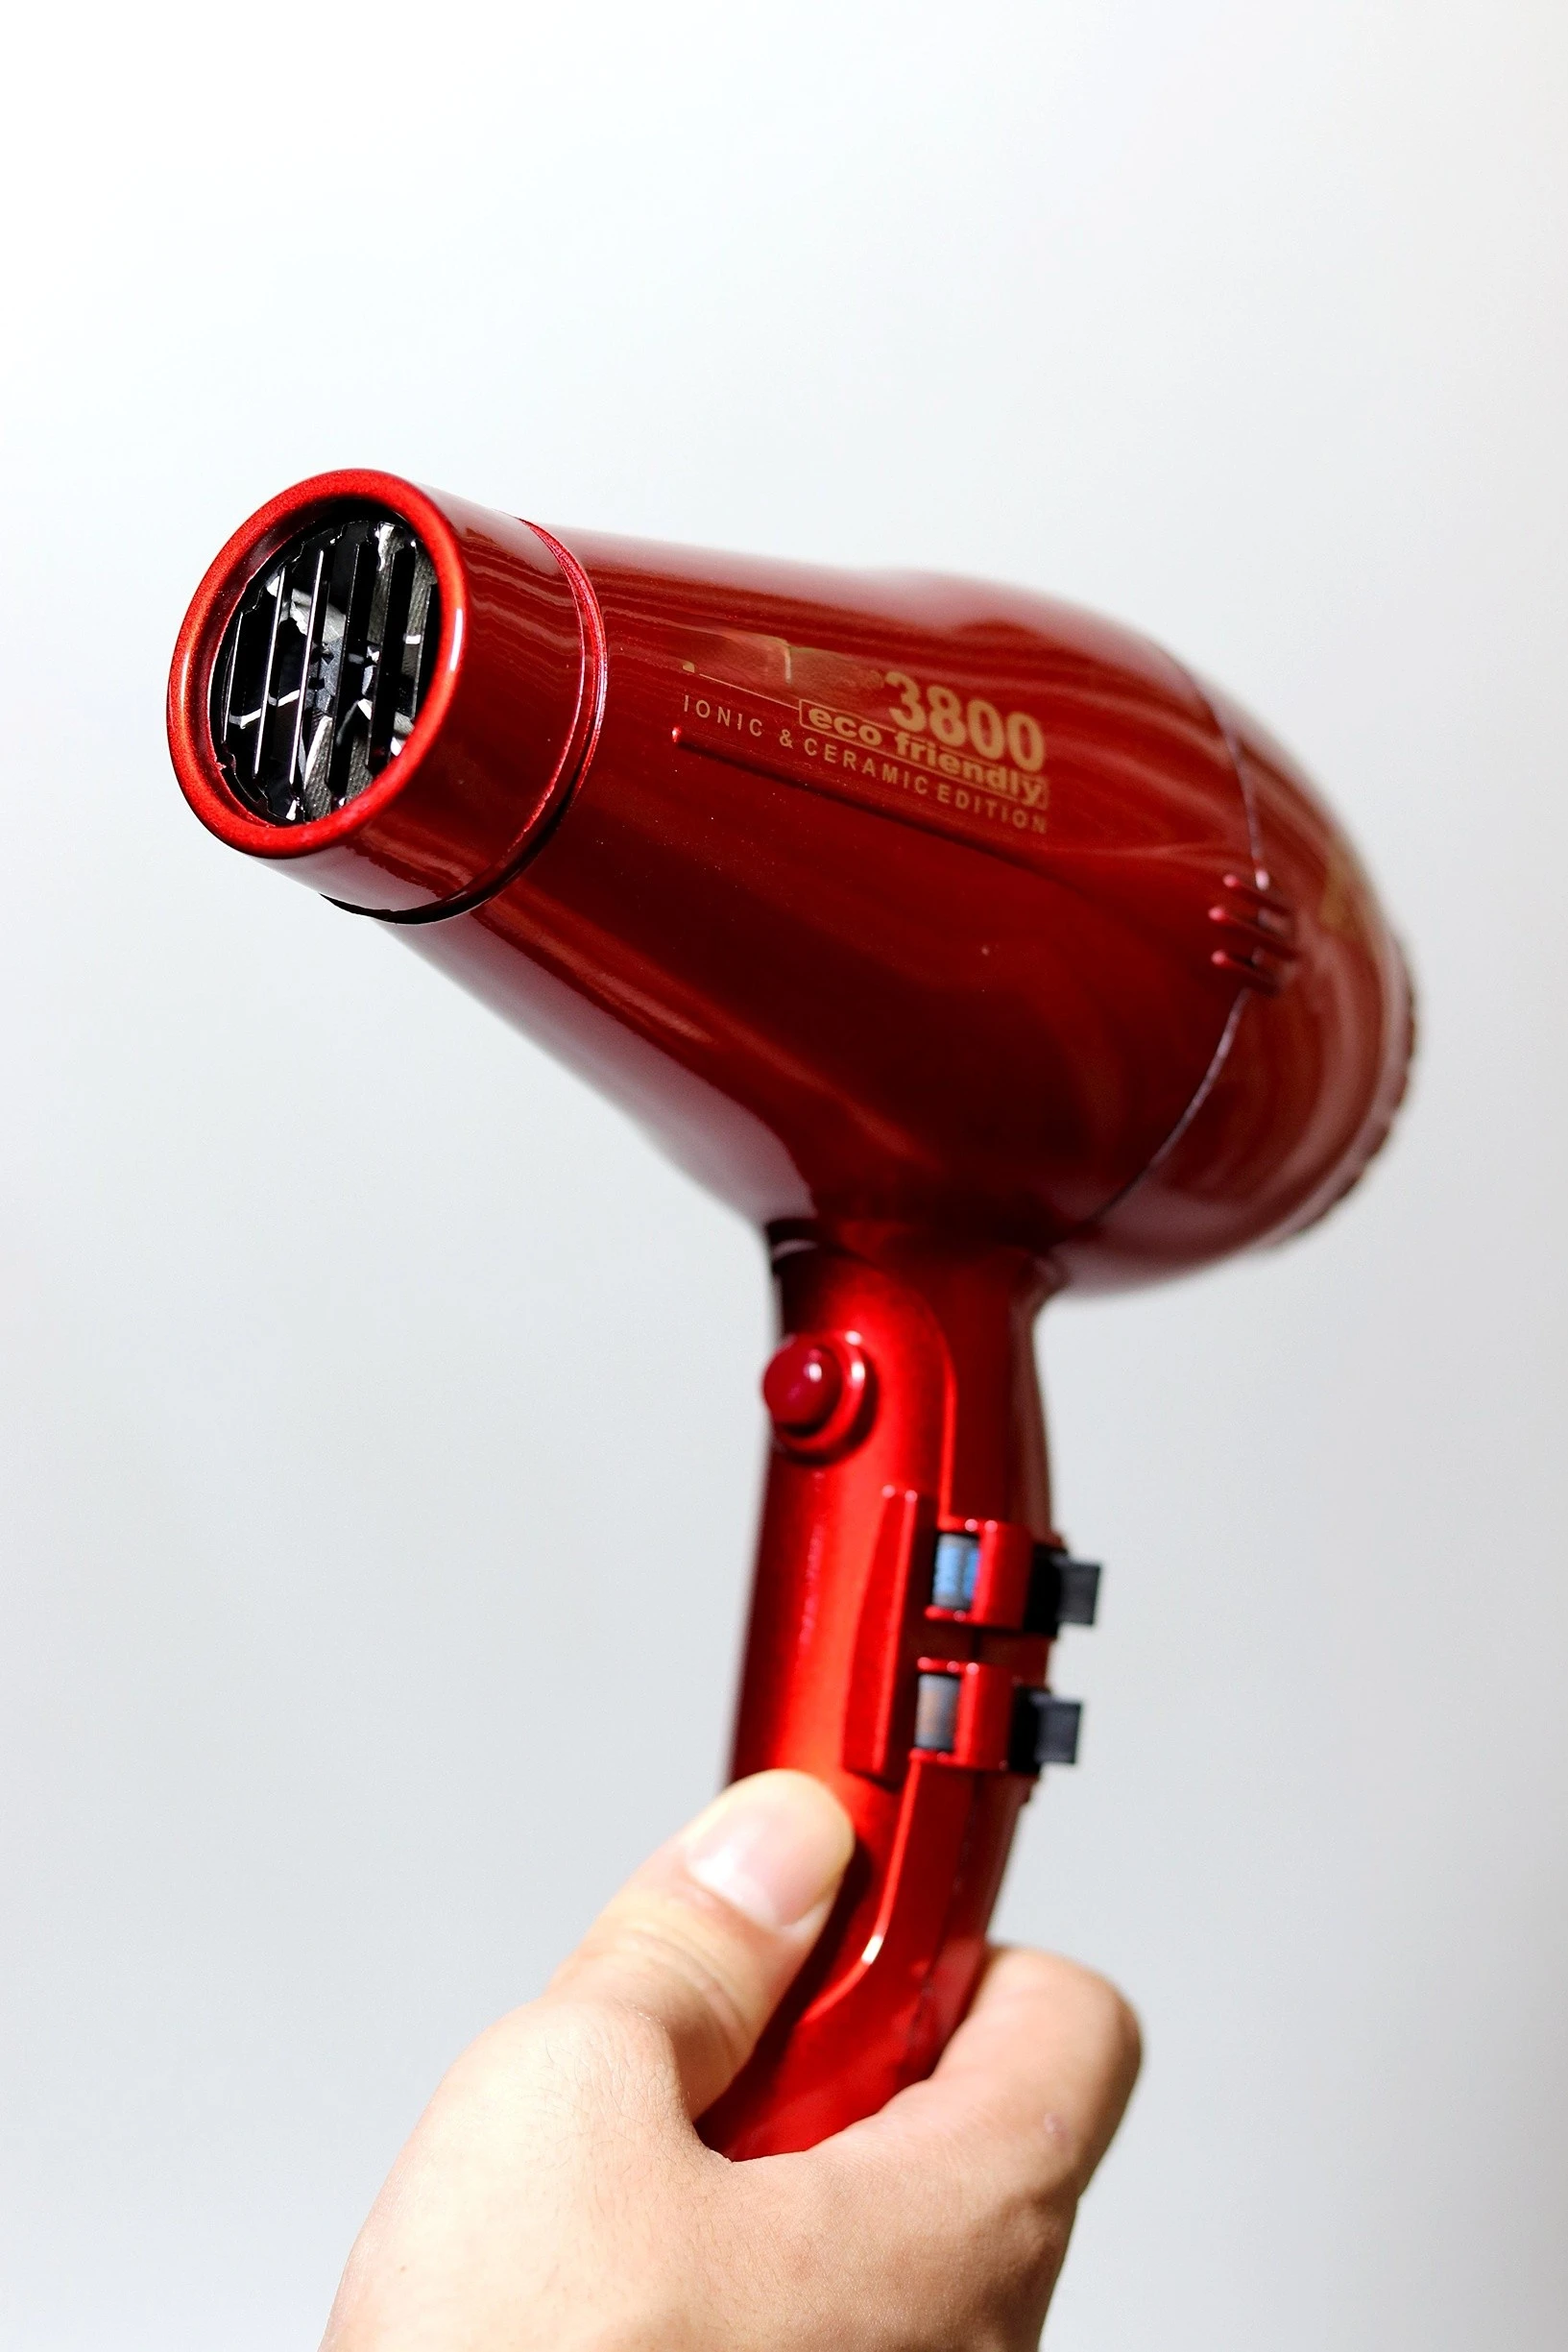 3800 Anion Professional Hair Dryer Free Shipping New in Personal Care Appliances Home images - 6